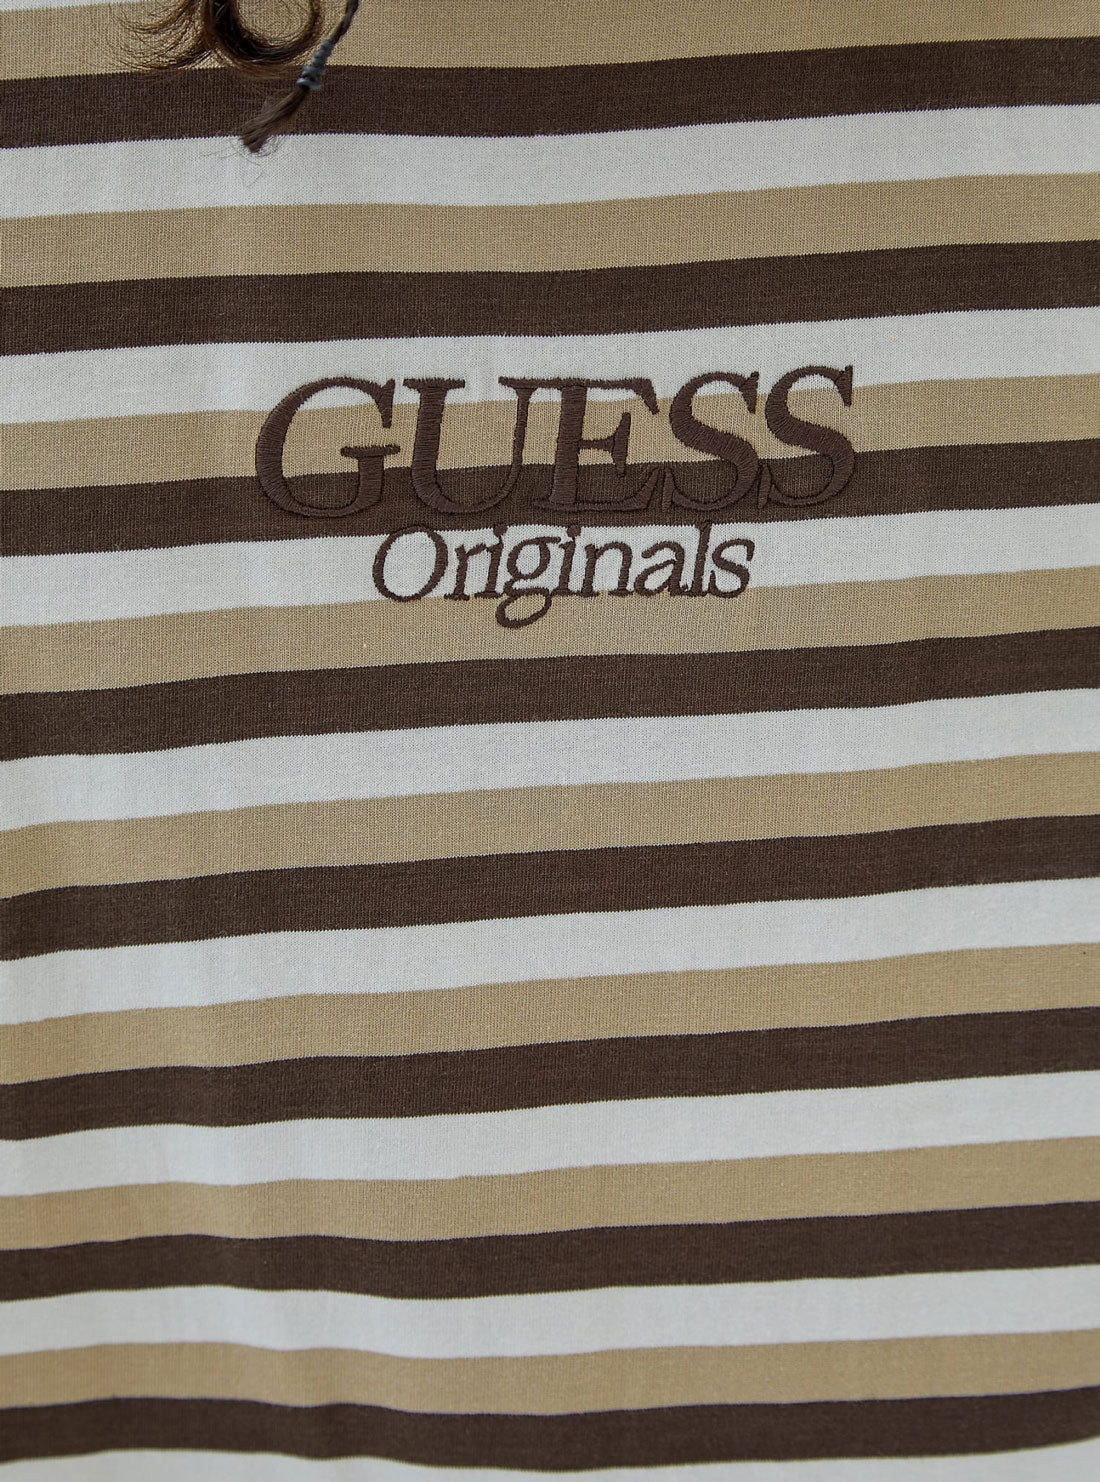 Guess Originals Eco Brown and White Striped T-Shirt | GUESS Men's Apparel | detail view